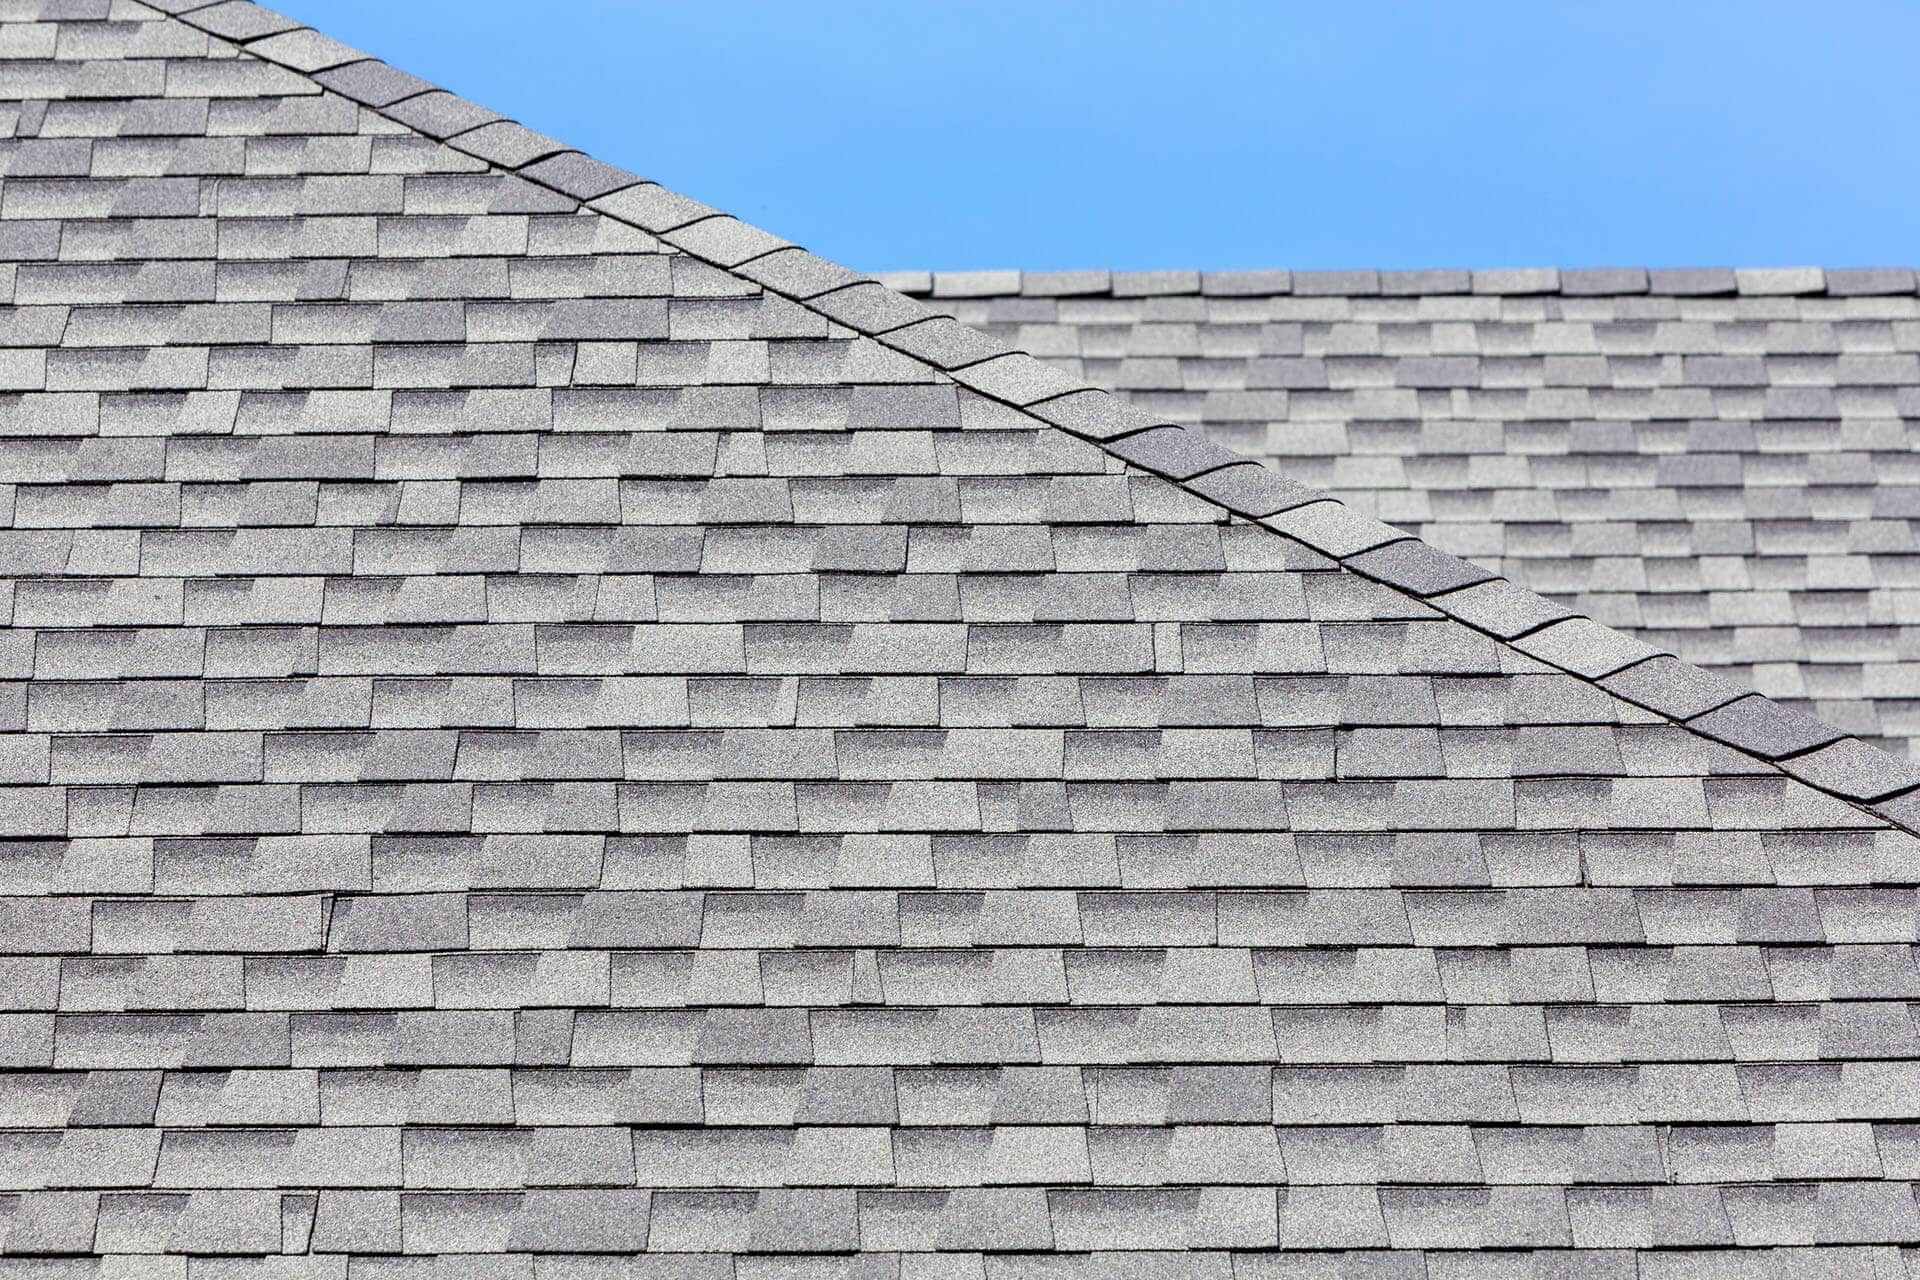 Roofing Contractor Near Me with Quality Roofing Materials